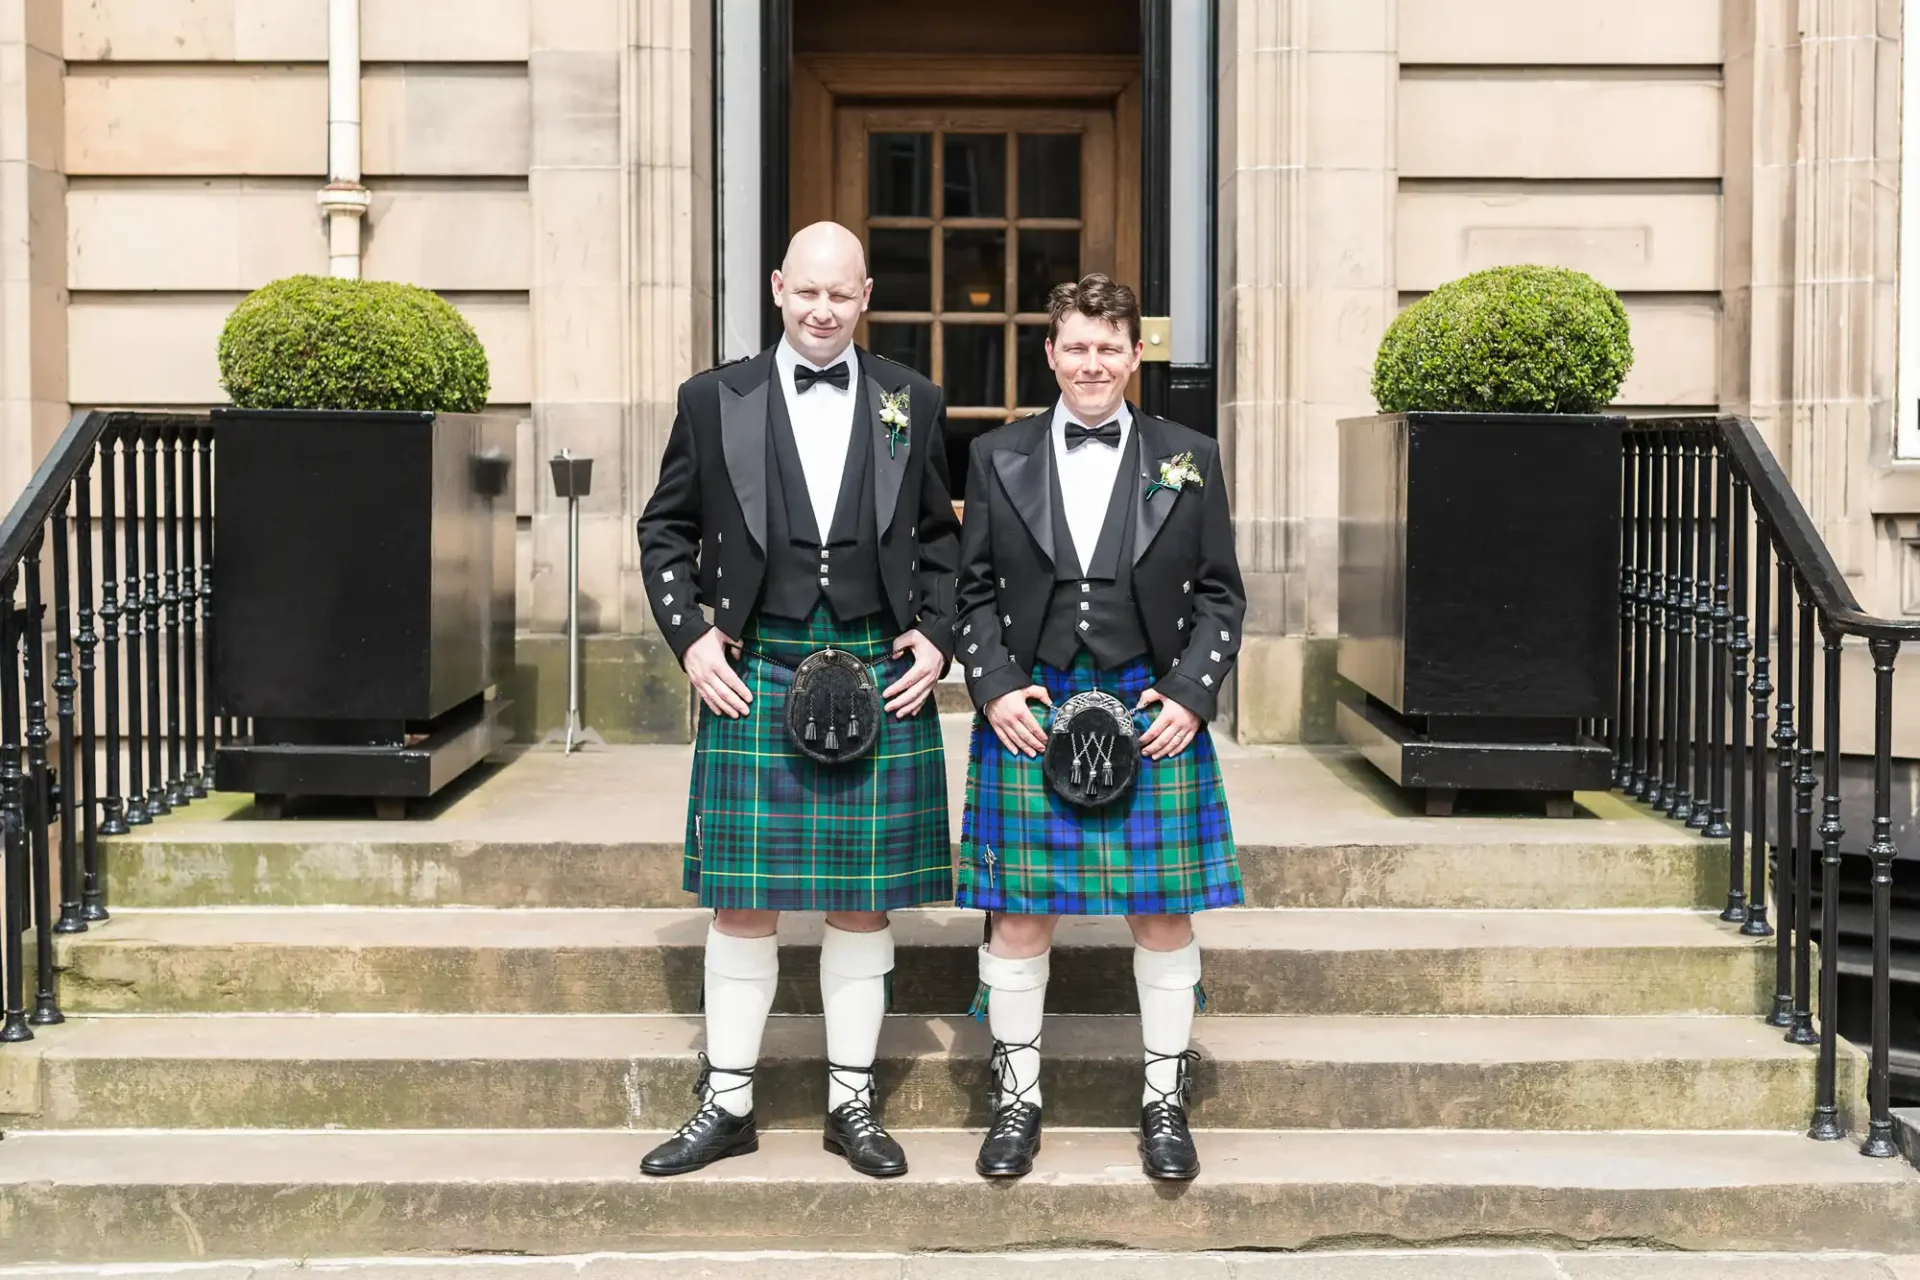 Two men in traditional scottish kilts and jackets standing on steps outside a building, smiling at the camera.